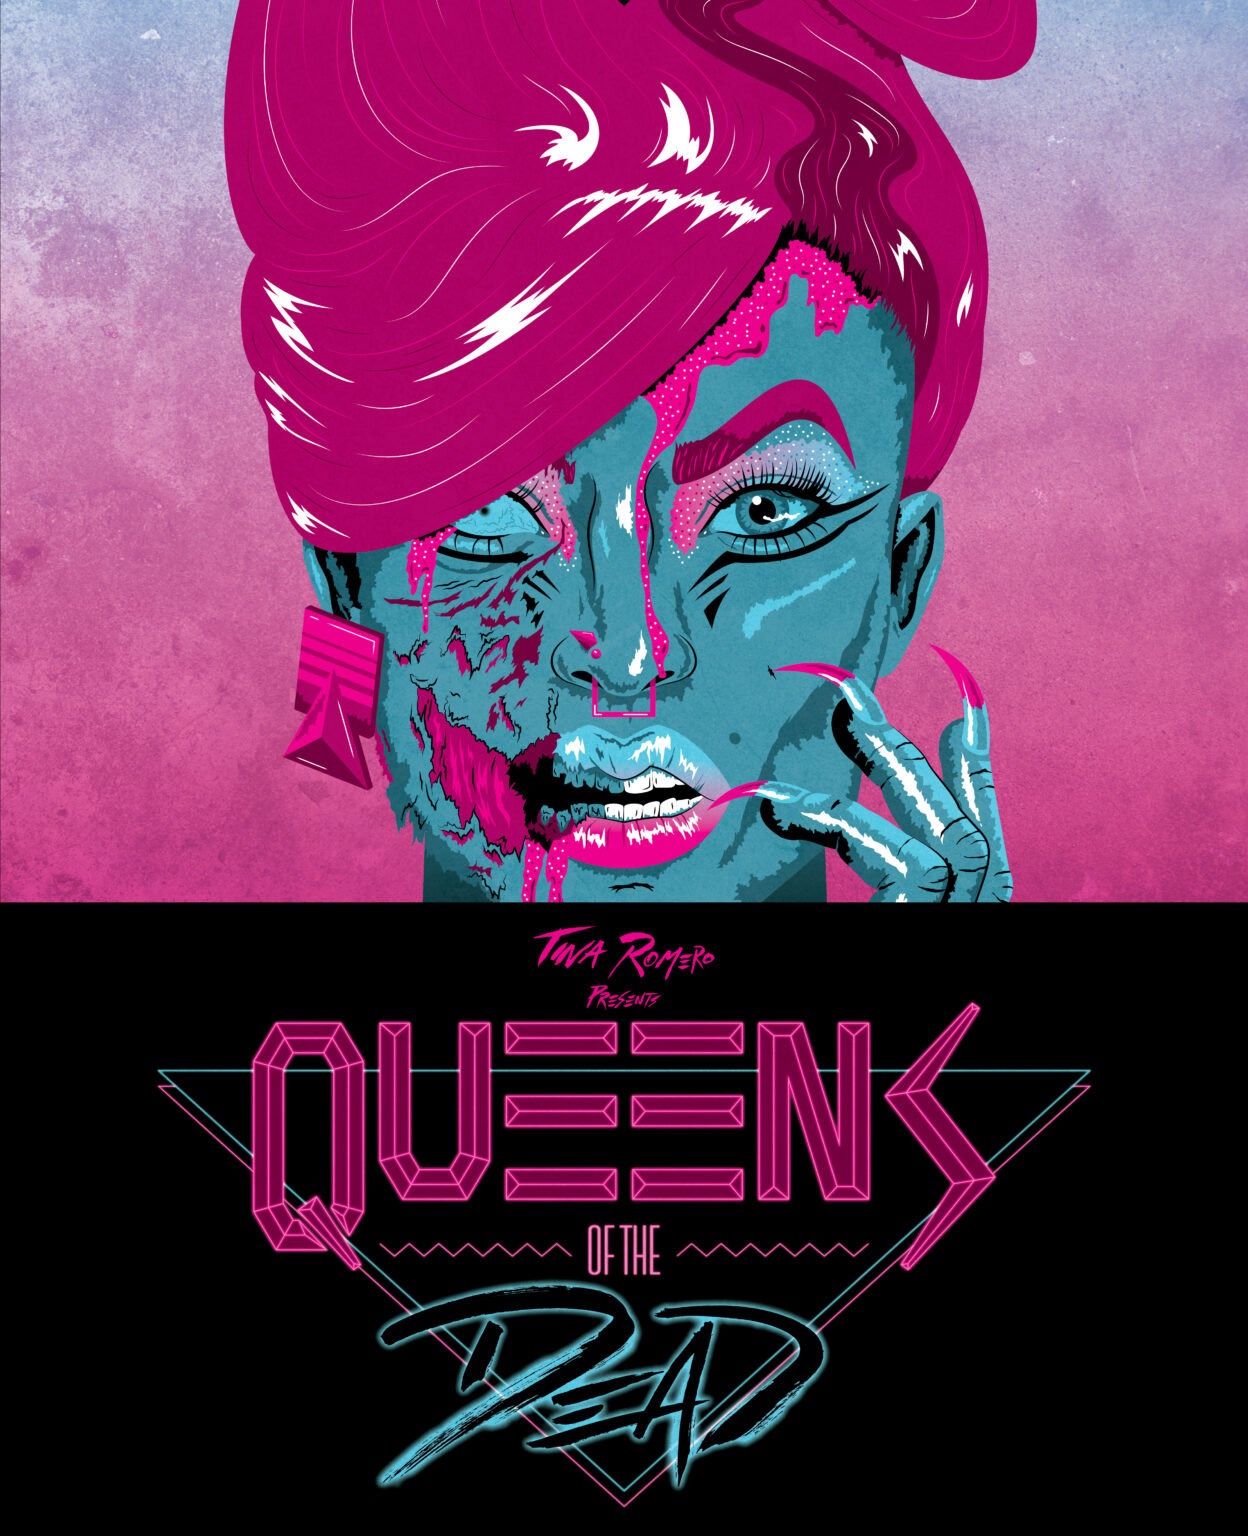 Queen Of the Night Dead consept poster